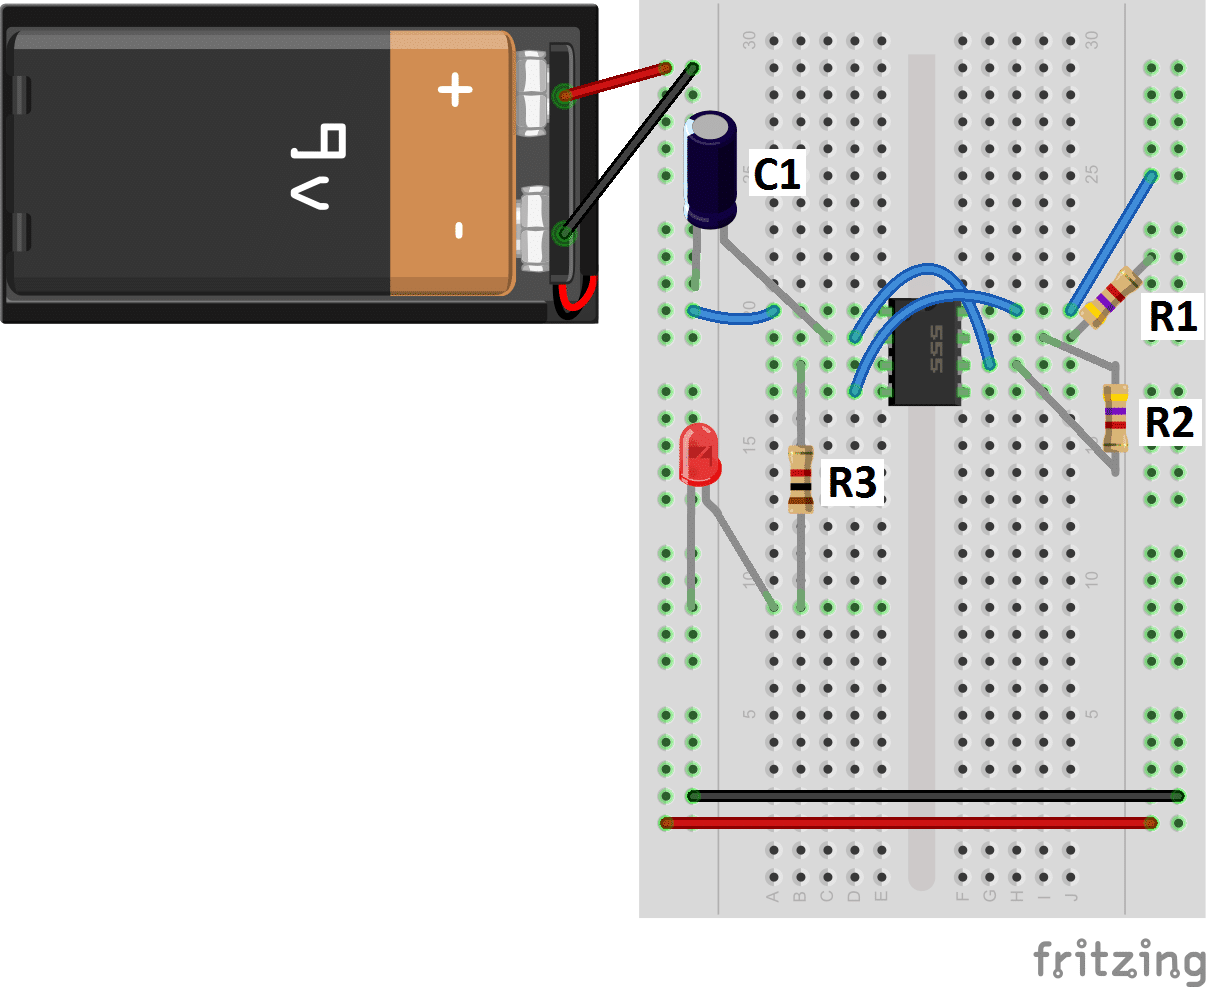 How to Make a Simple LED Flashing Circuit using 555 Timer IC